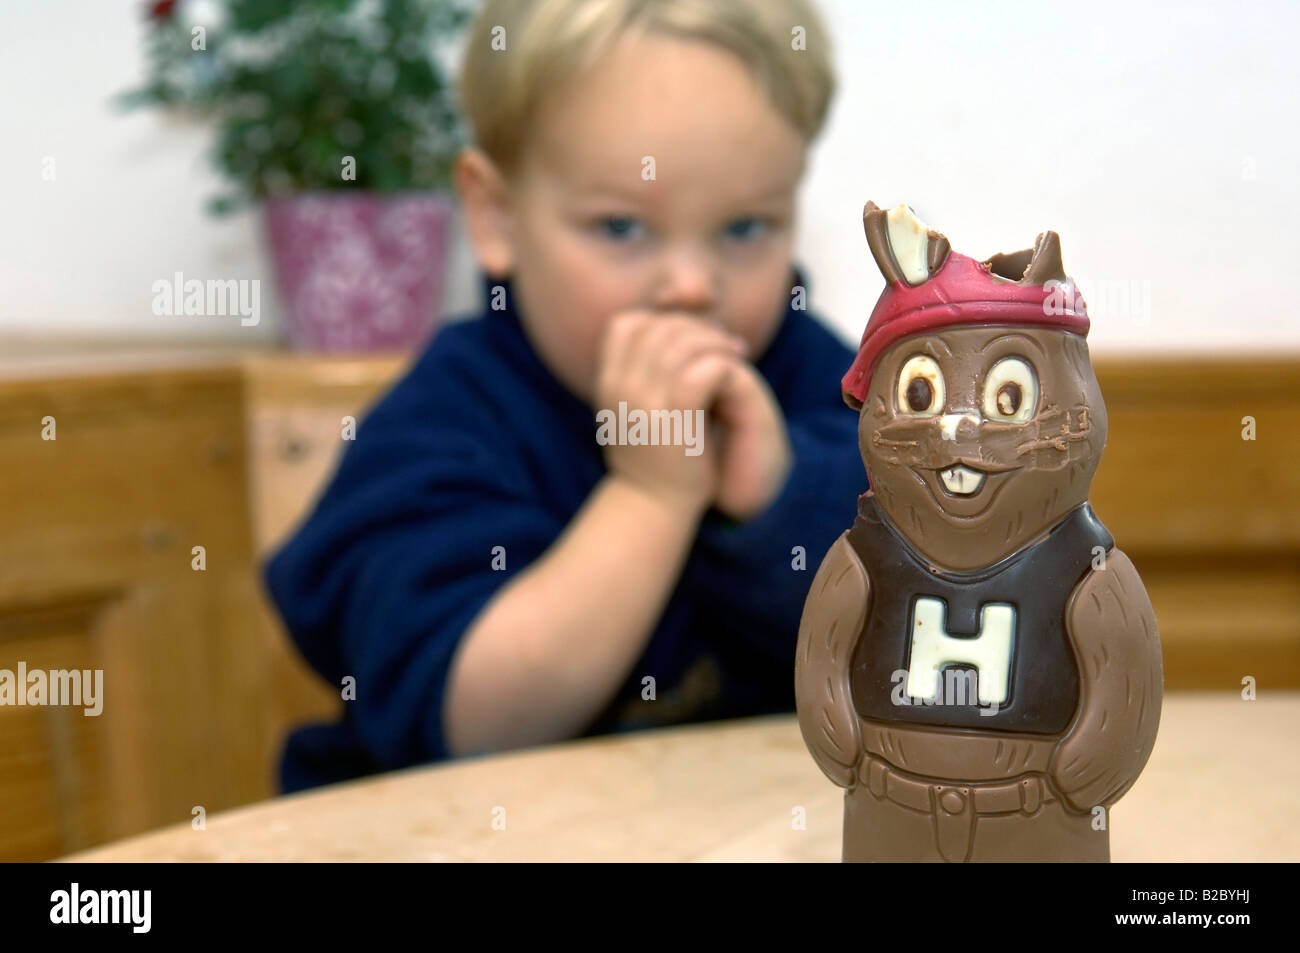 3 year-old boy sitting behind a chocolate Easter bunny with bitten off ears Stock Photo